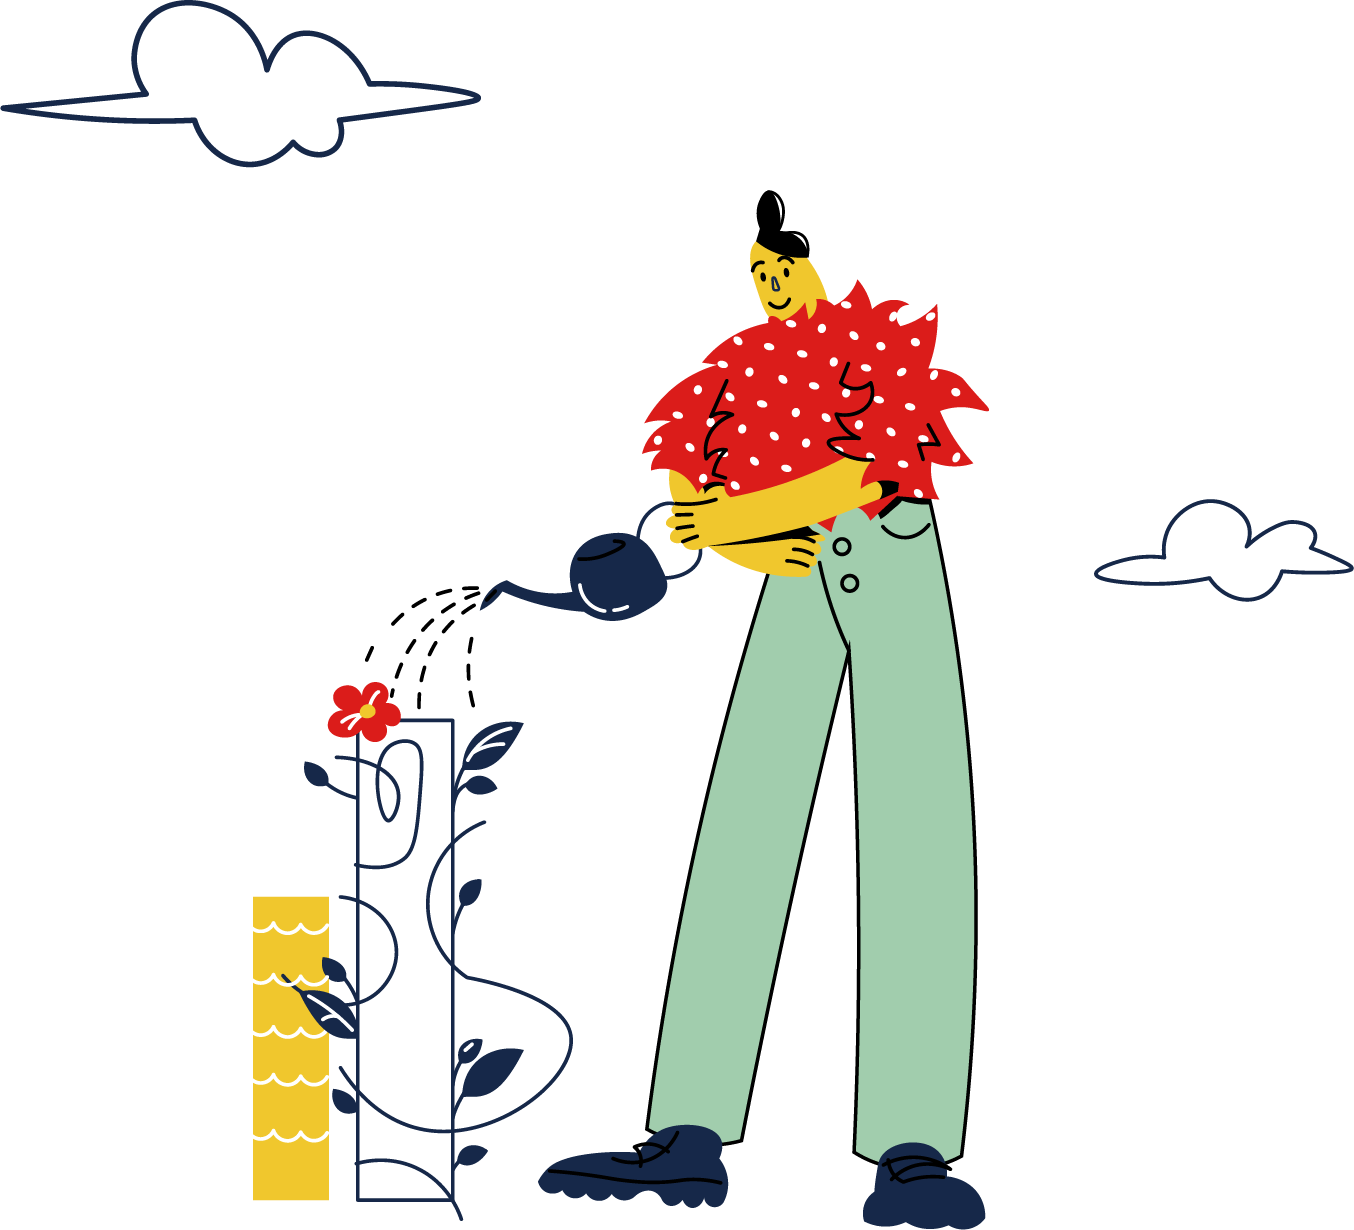 illustration of person watering plants with clouds in the sky